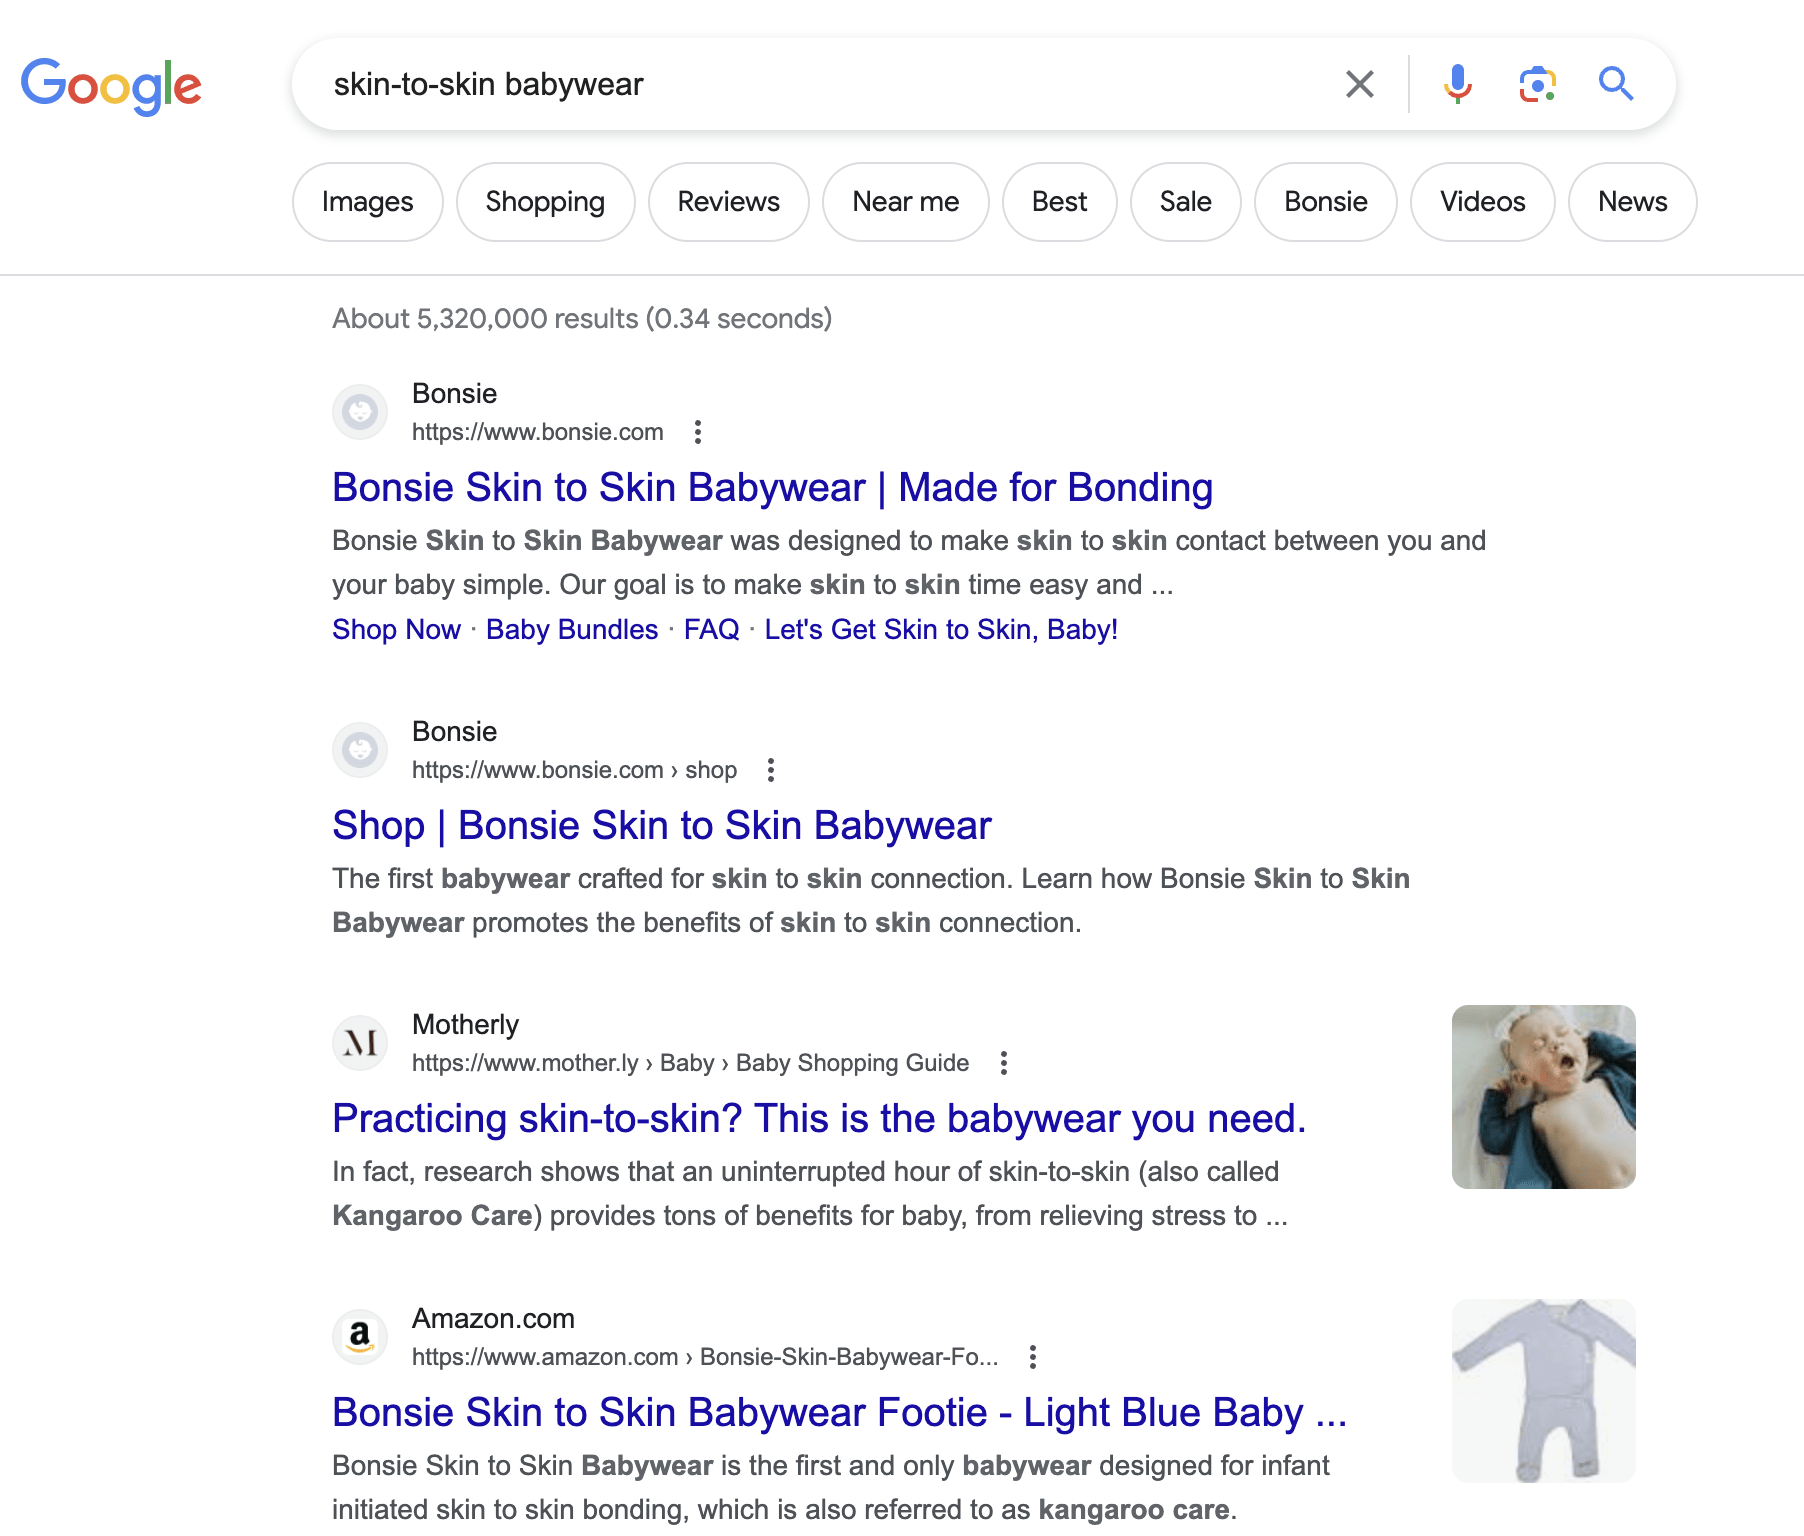 Search Engine Page example for keyword skin to skin babywear